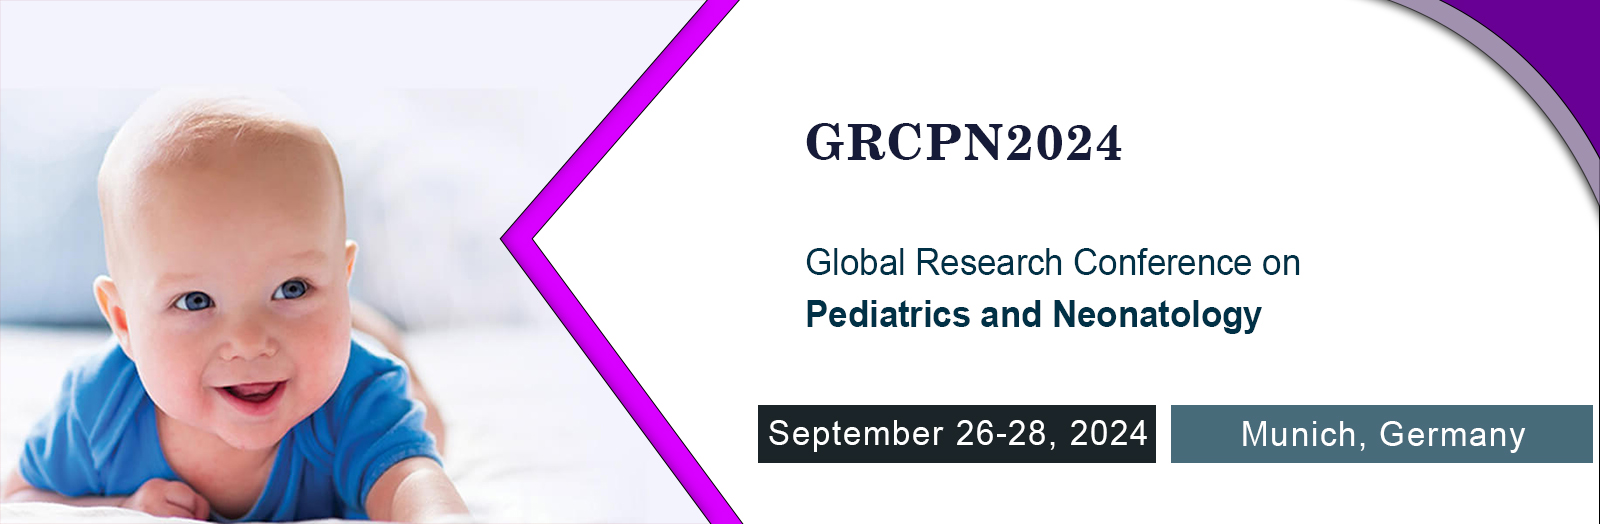 Global Research Conference on Pediatrics and Neonatology